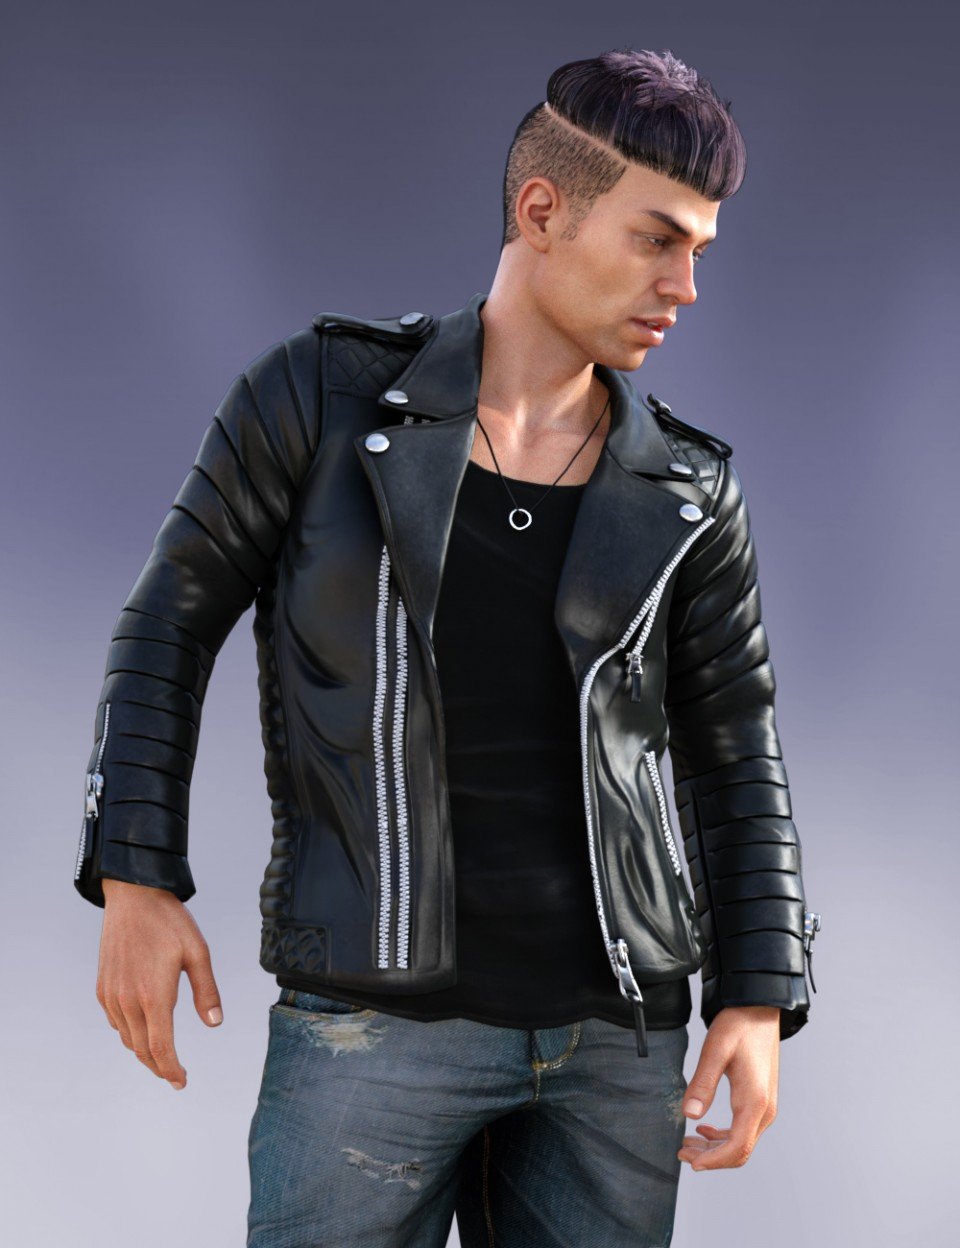 Pop Star Outfit and Hair for Diego 8 and Genesis 8 Male(s)_DAZ3D下载站